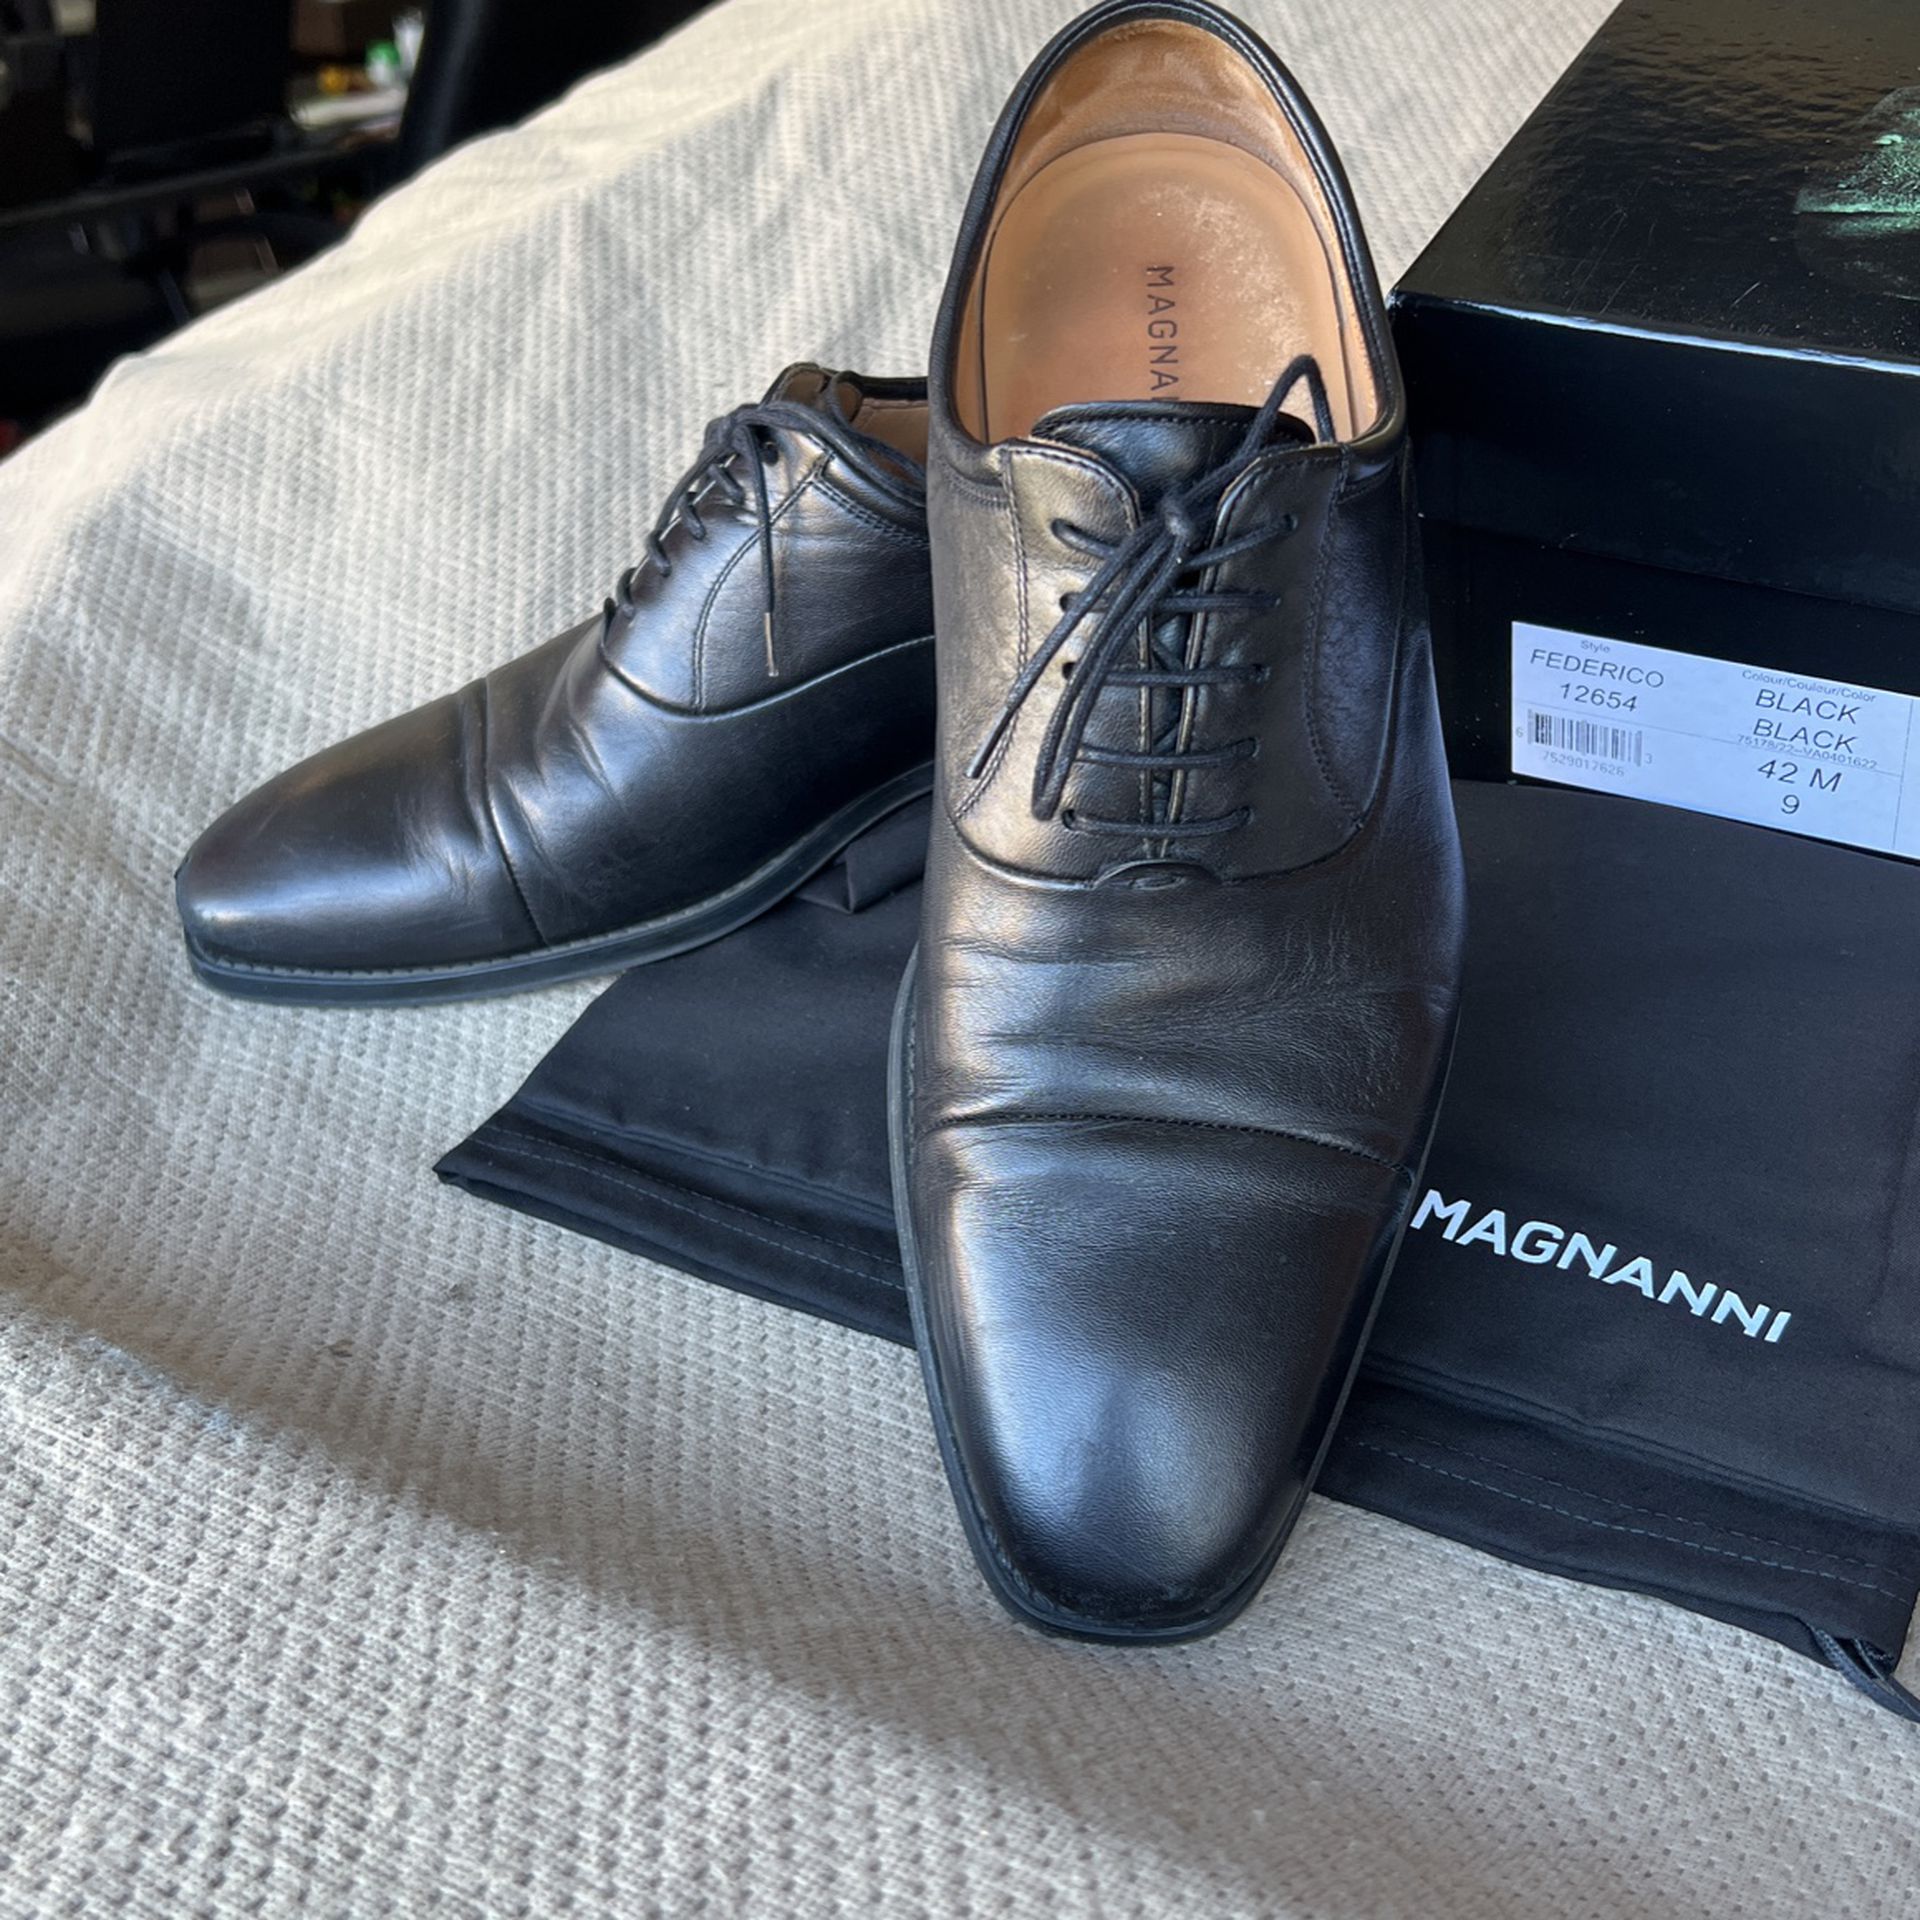 Shoes Magnanni Federico 12654 Size 9 for Sale in El Monte, CA - OfferUp